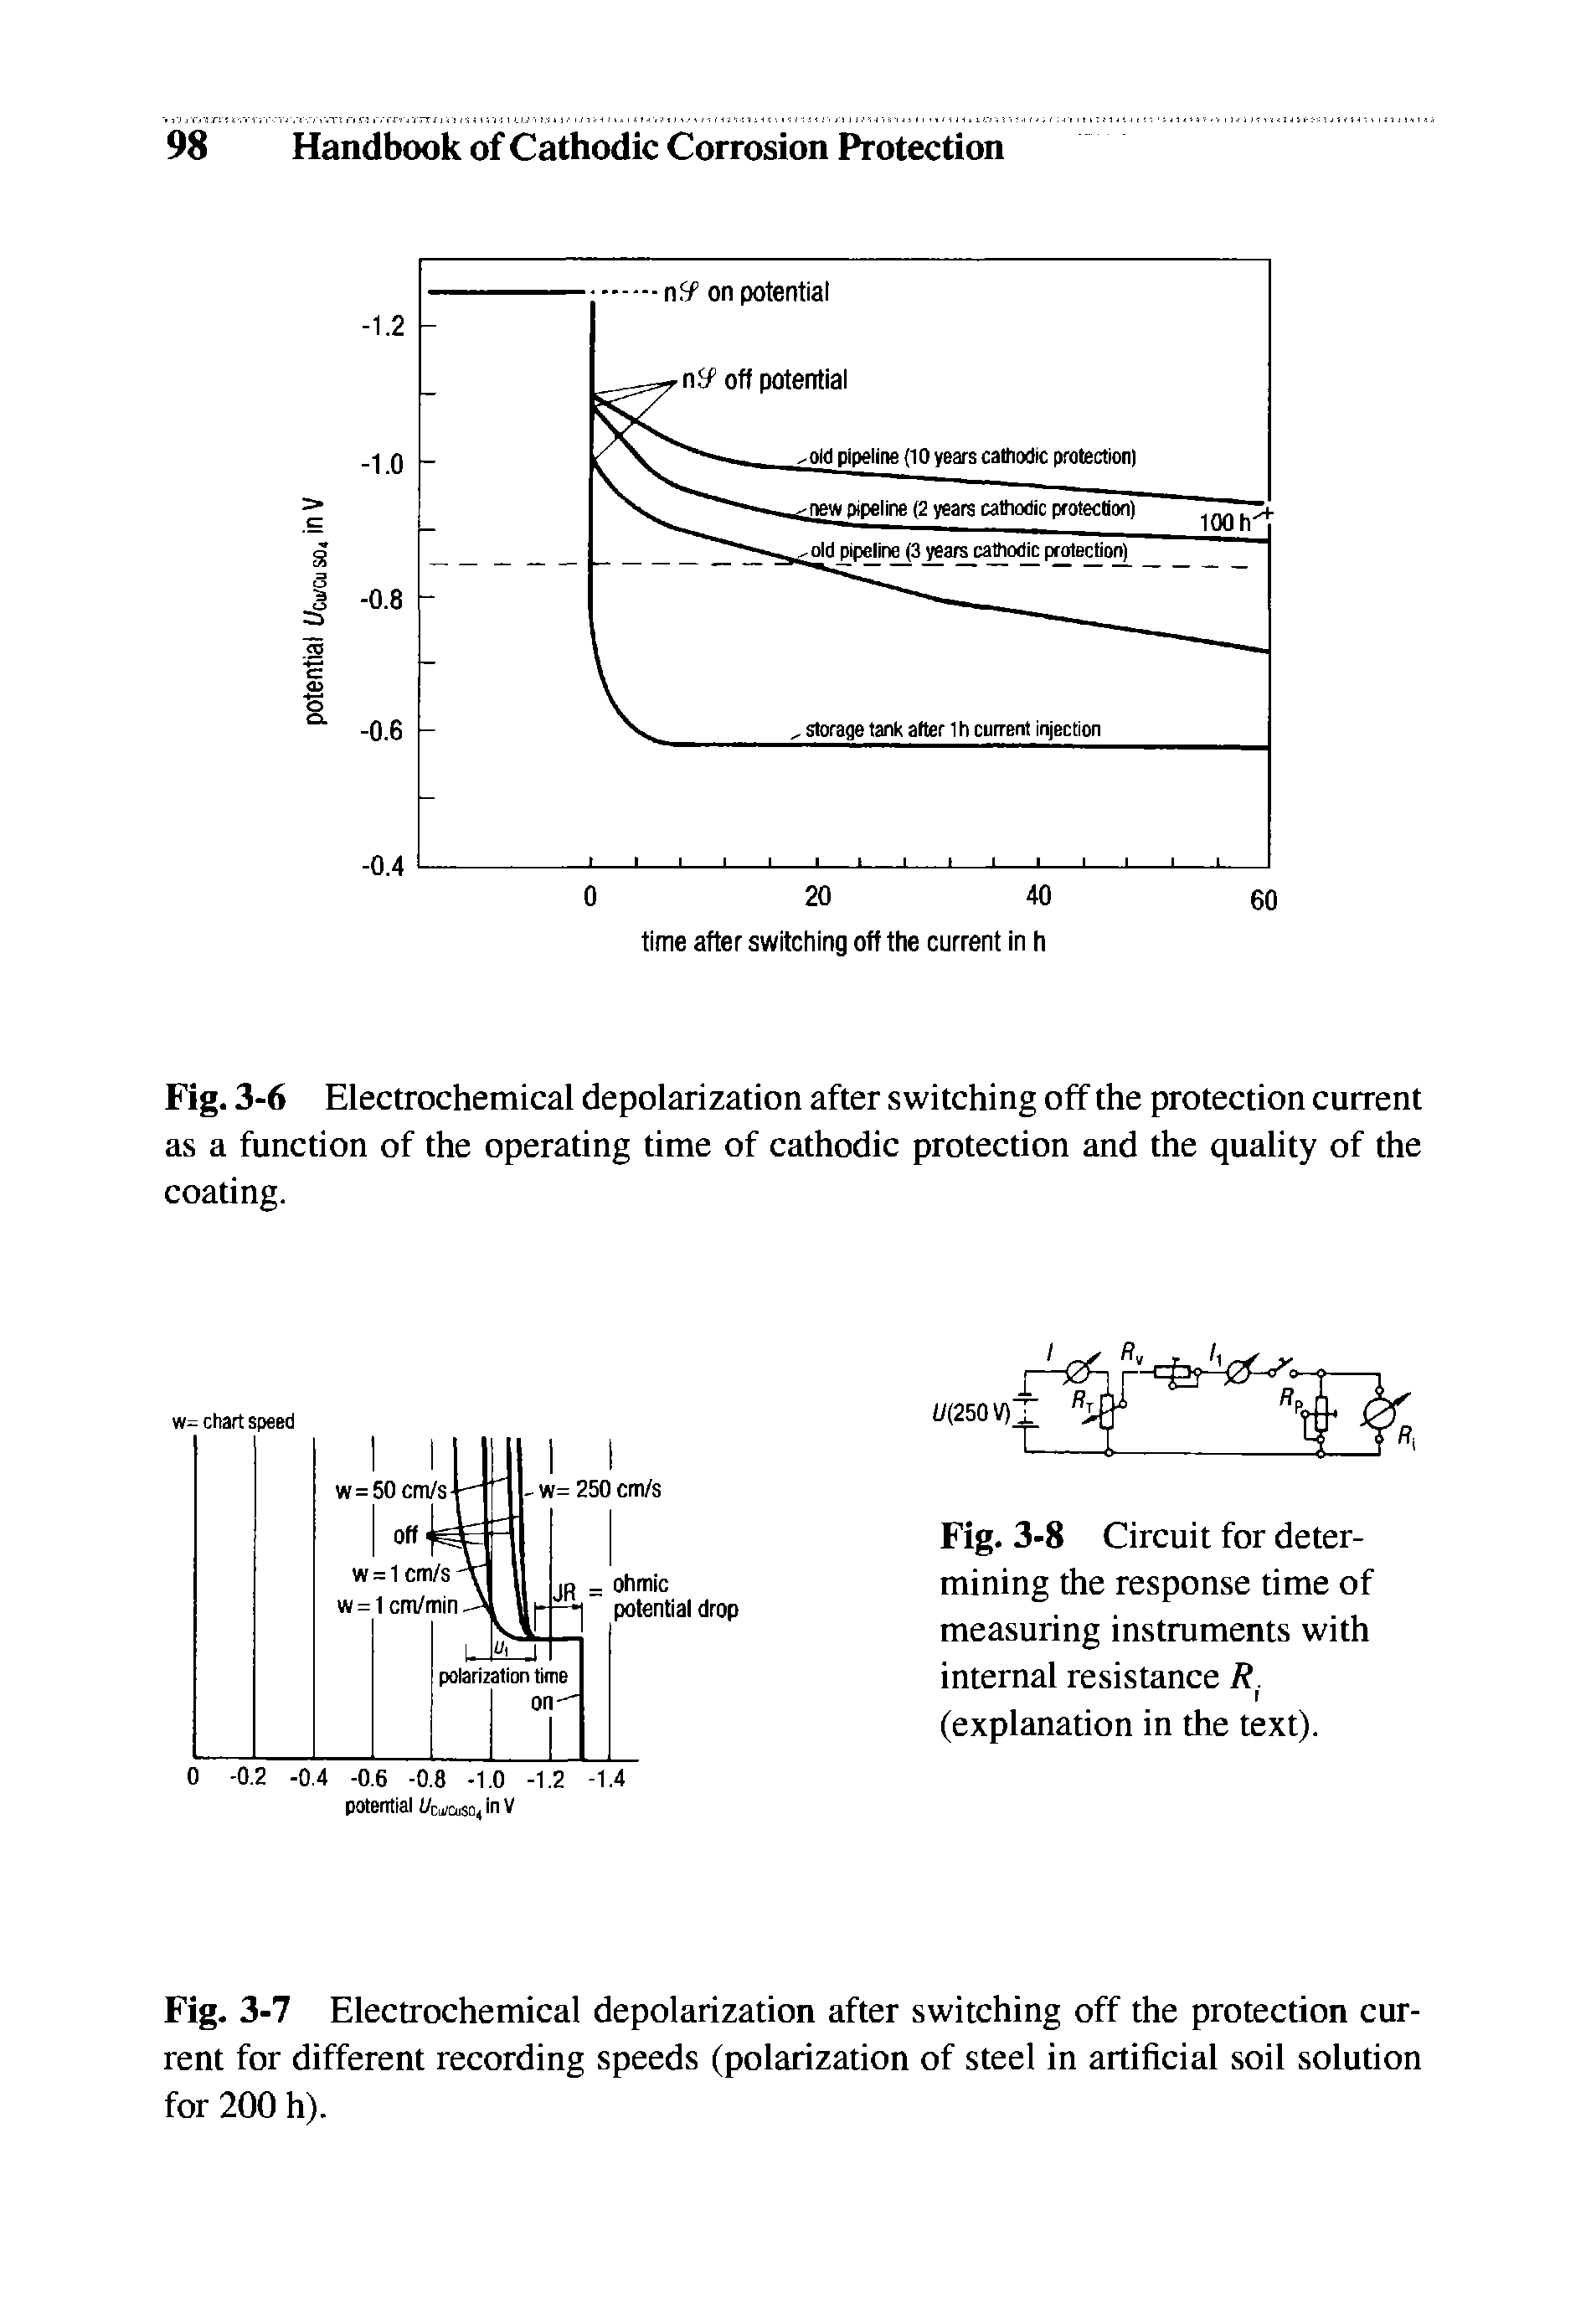 Fig. 3-7 Electrochemical depolarization after switching off the protection current for different recording speeds (polarization of steel in artificial soil solution for 200 h).